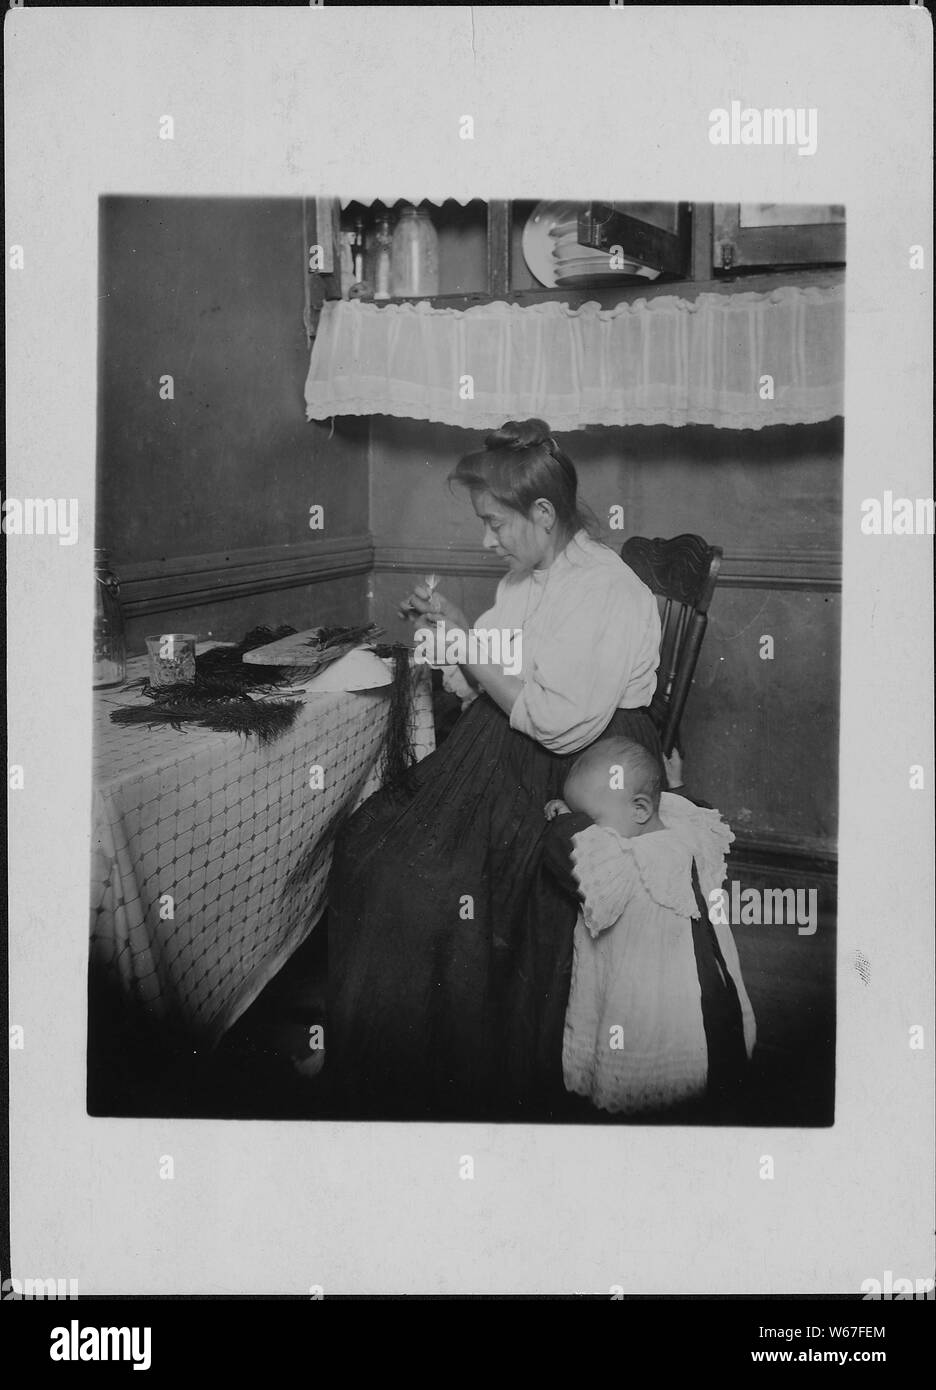 Mrs. Capello makes 50 [cents] to $1 a week making willow plumes. Husband works irregularly as a tailor. New York City. Stock Photo